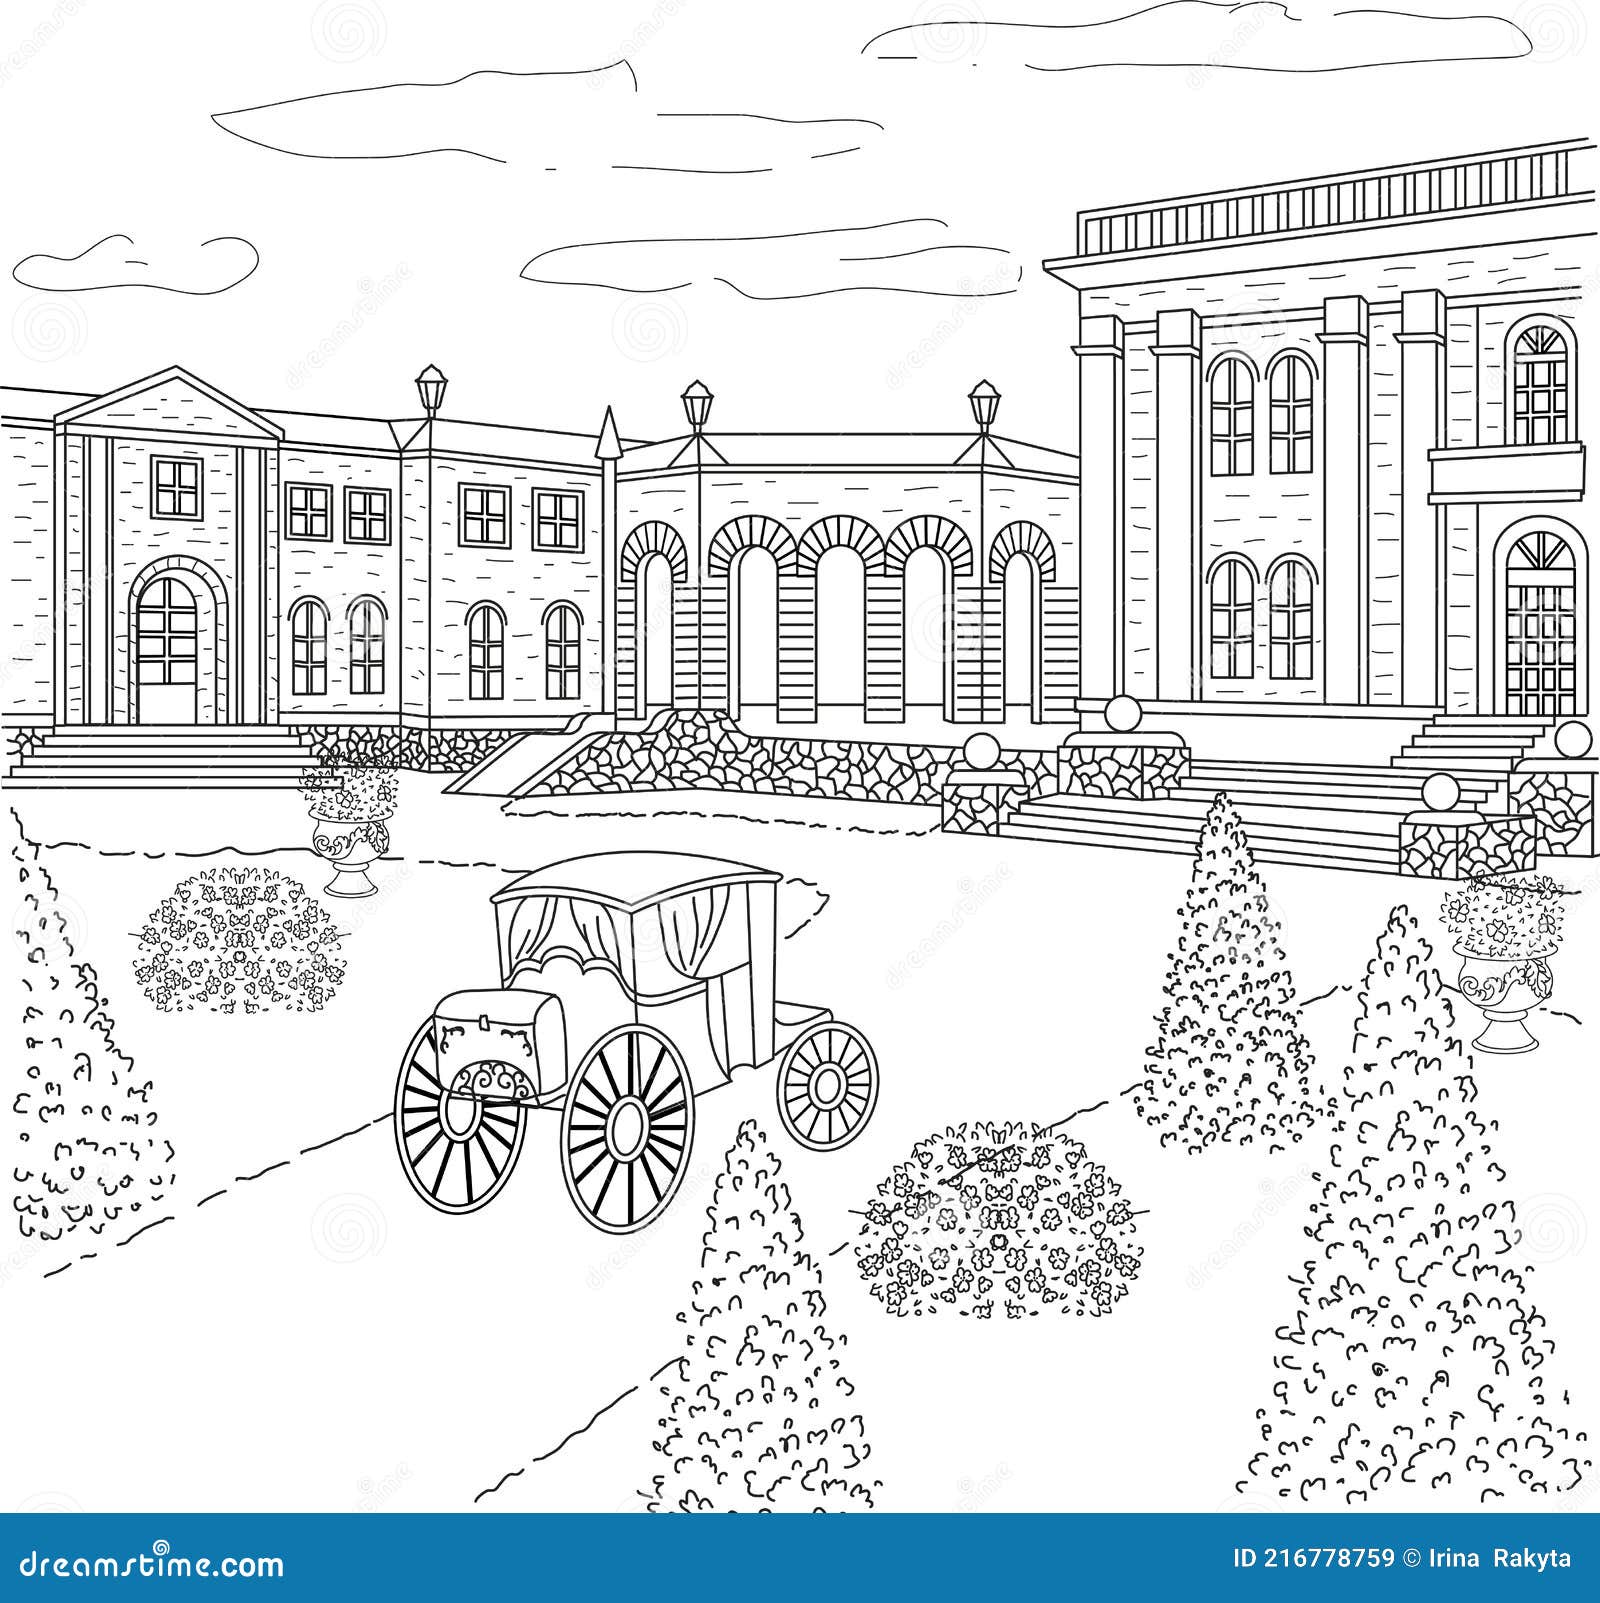 retro palace line art coloring page, classicism residence hand-drawn , architecture cityscape